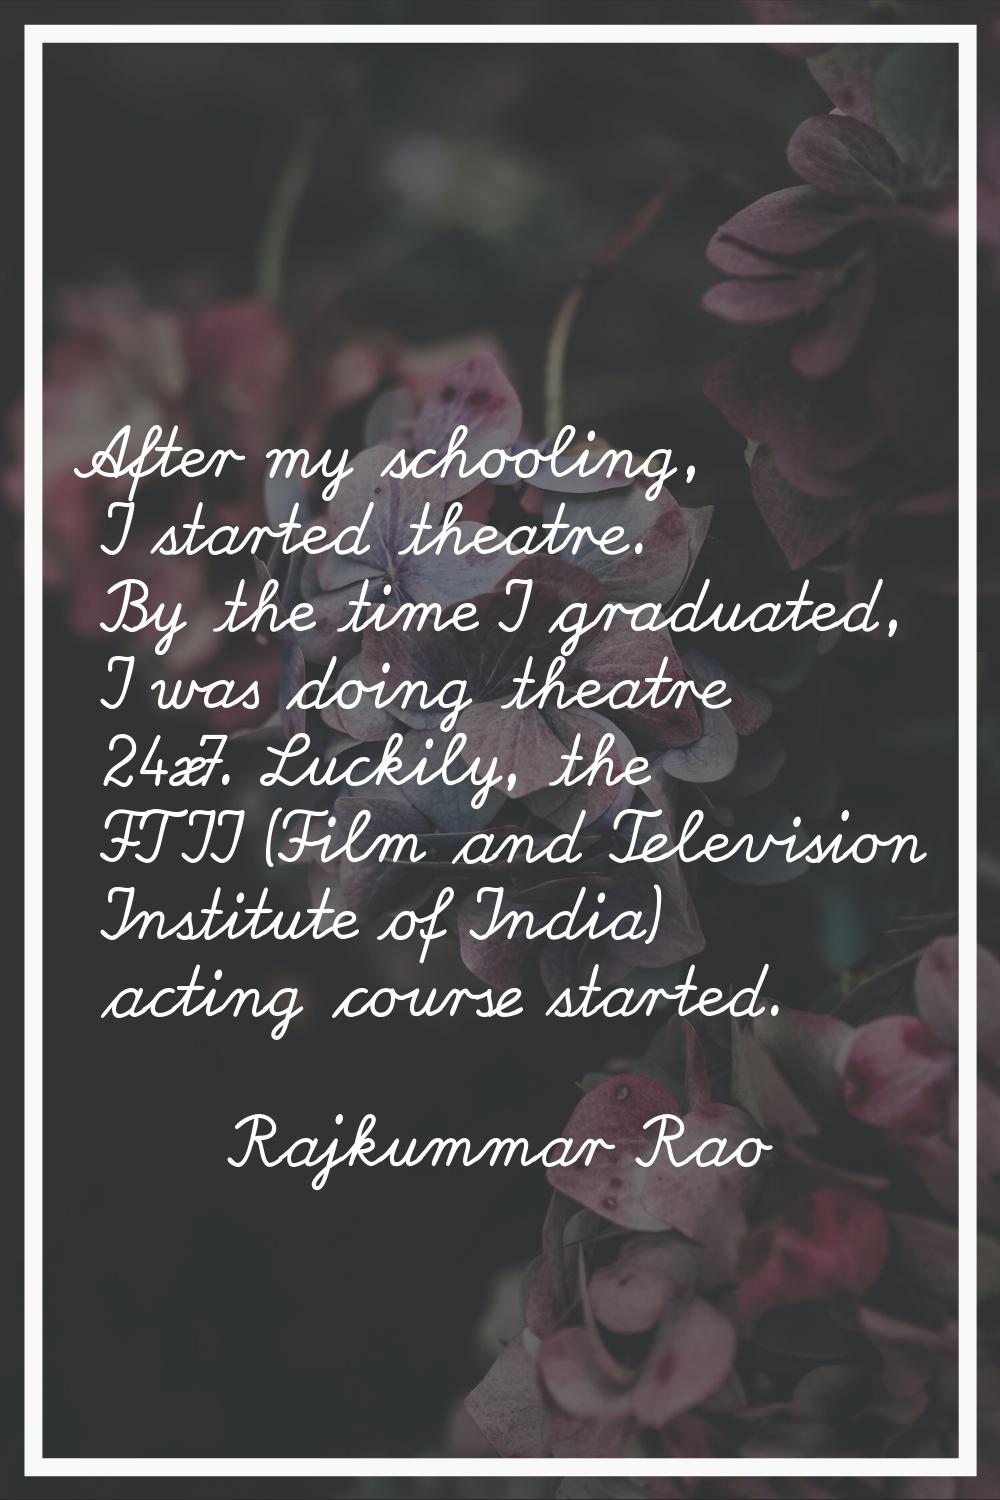 After my schooling, I started theatre. By the time I graduated, I was doing theatre 24x7. Luckily, 